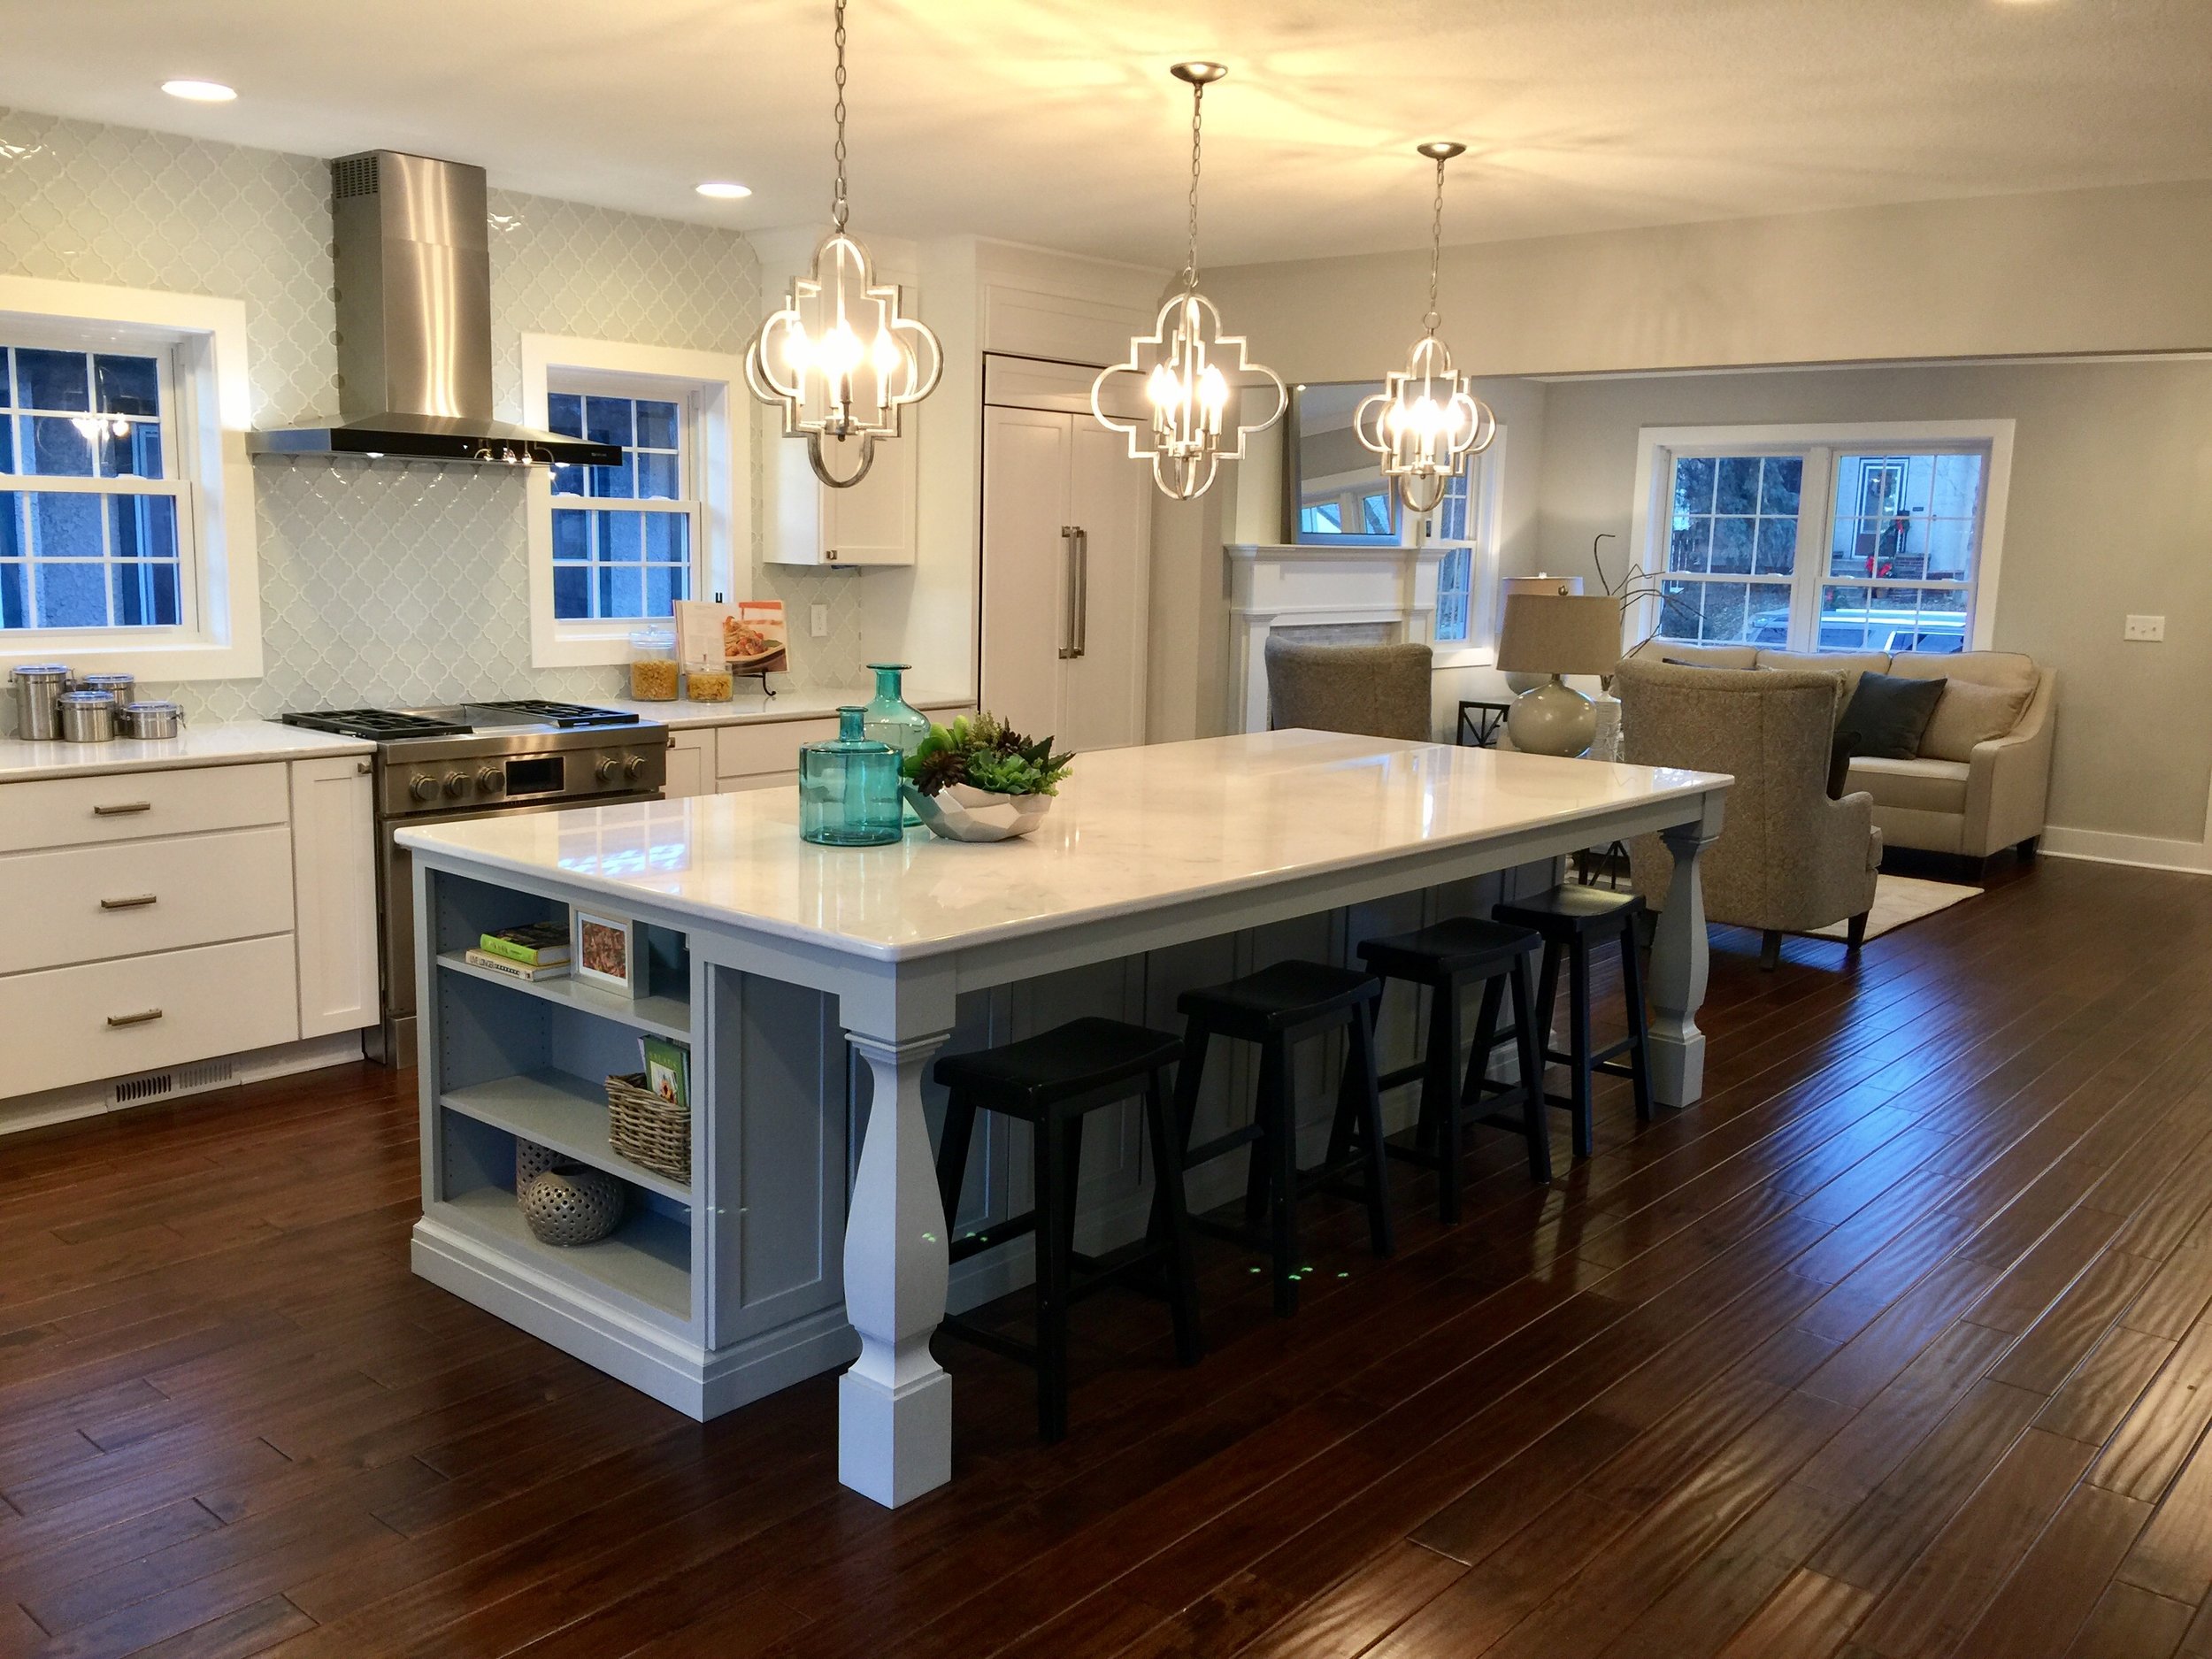 How To Choose The Best Pendant Lighting, Best Lighting For Kitchen Island